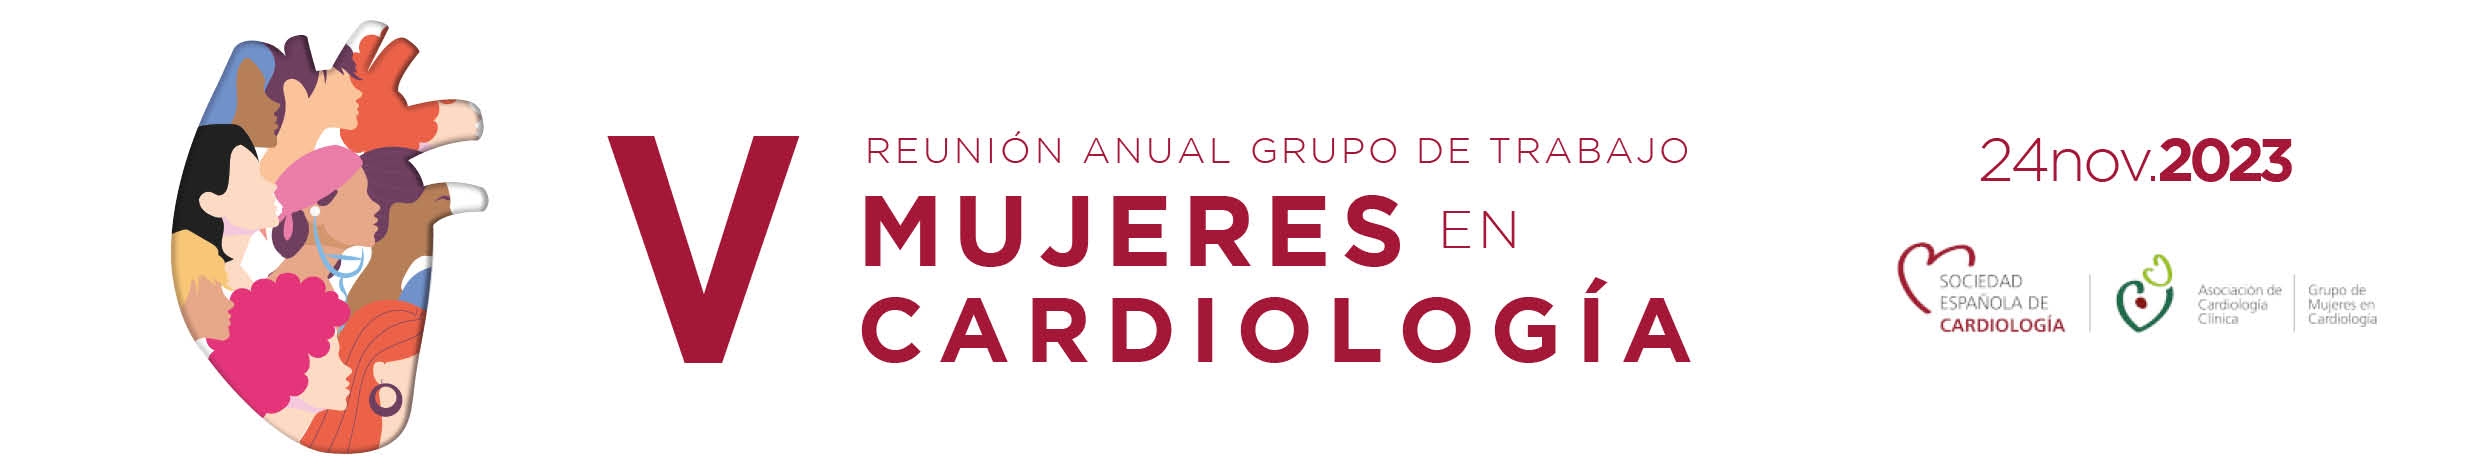 banner_muejeres_cardiologia_A4